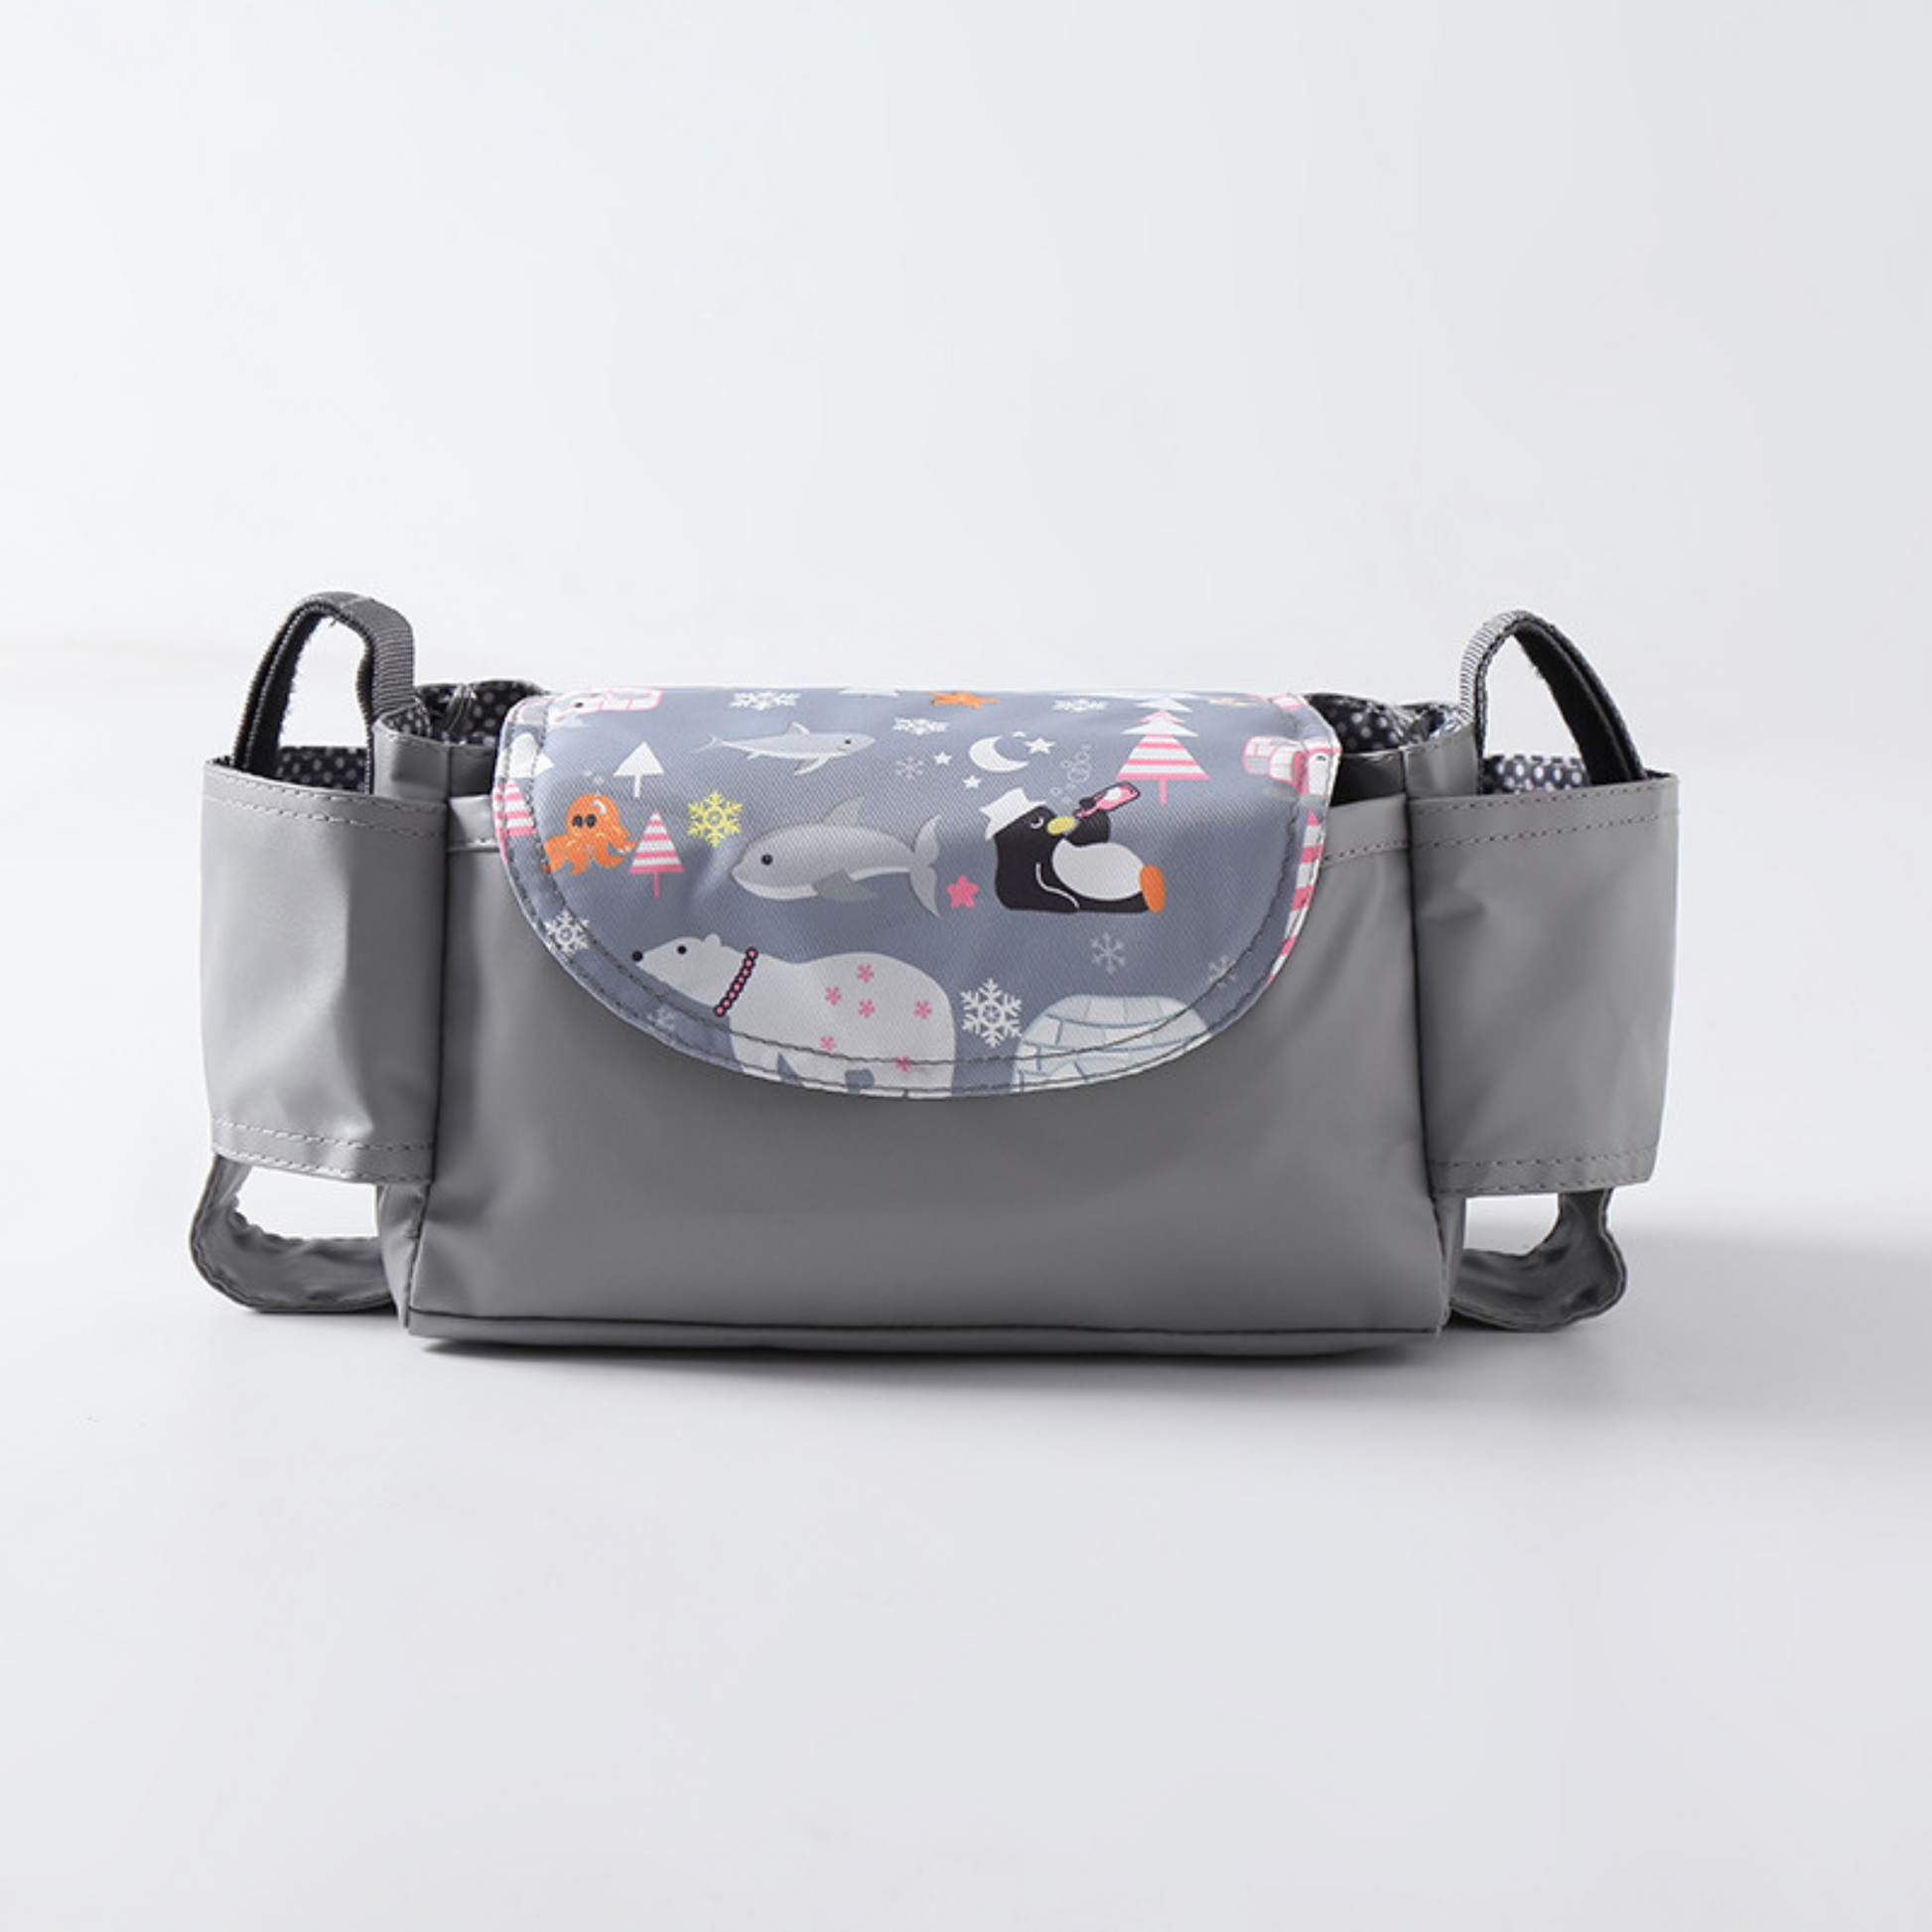 grey stroller organizer bag and cup holder with artic and polar animals print on a white background